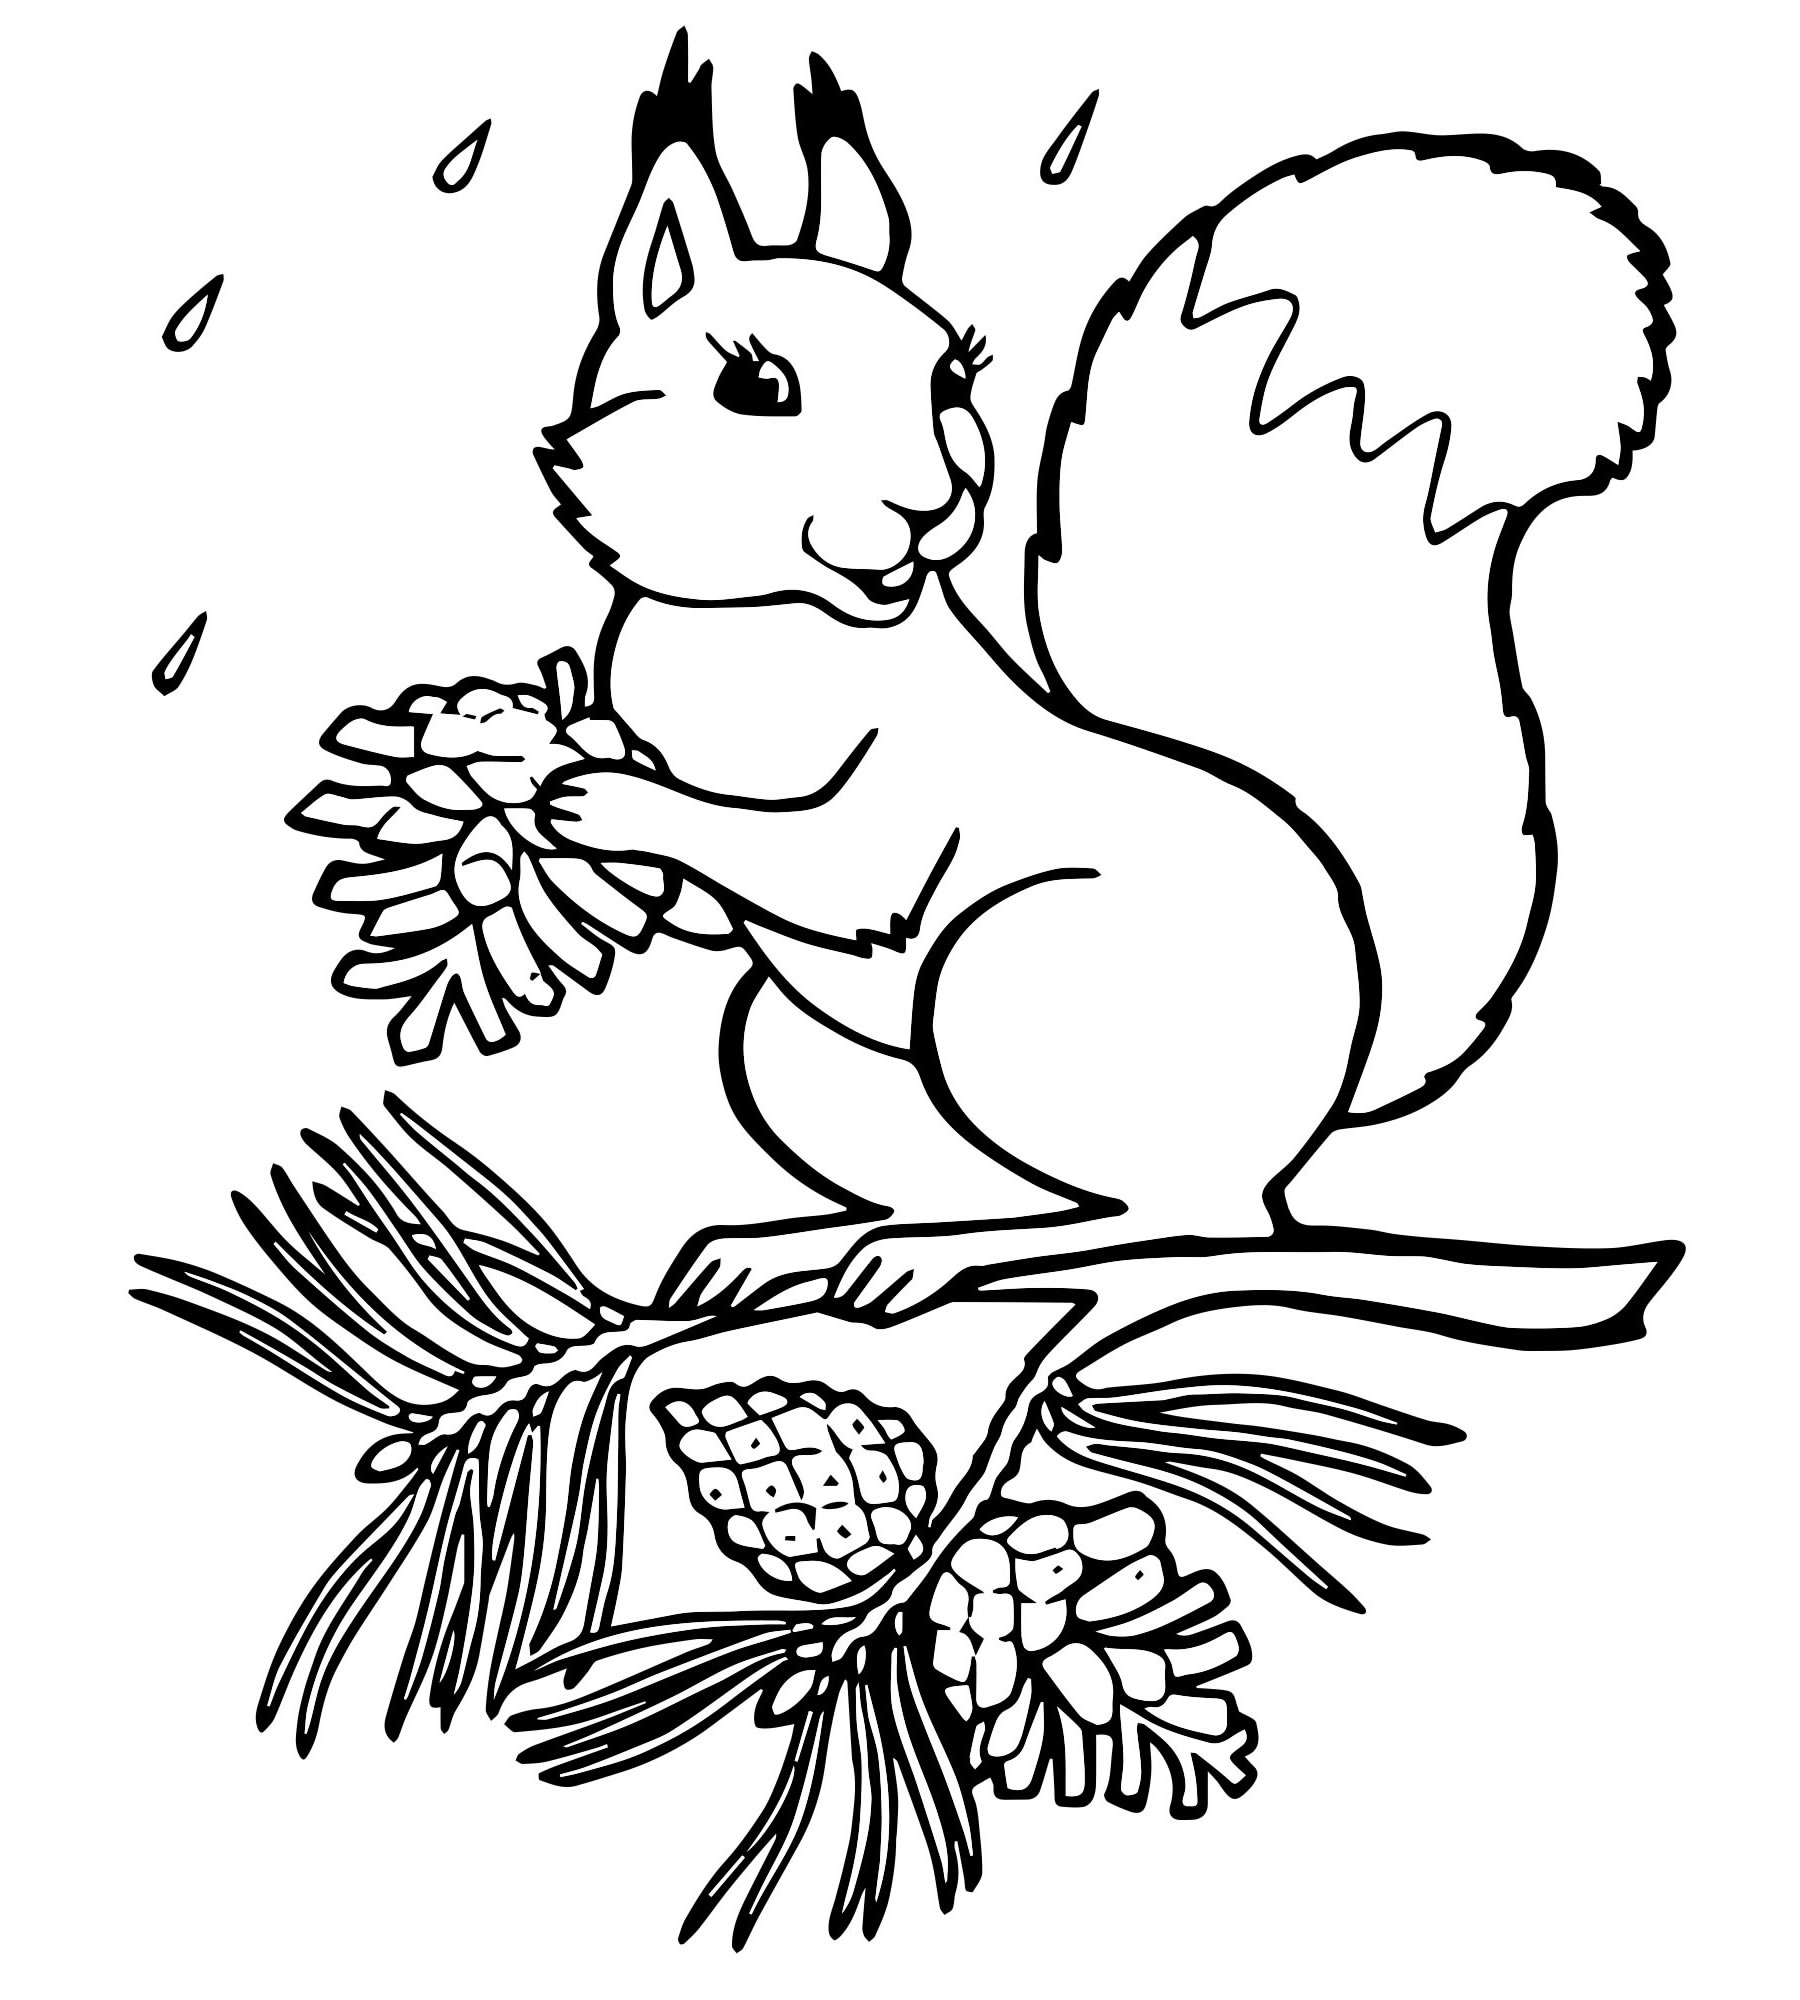 Squirrel nuts coloring pages for kids